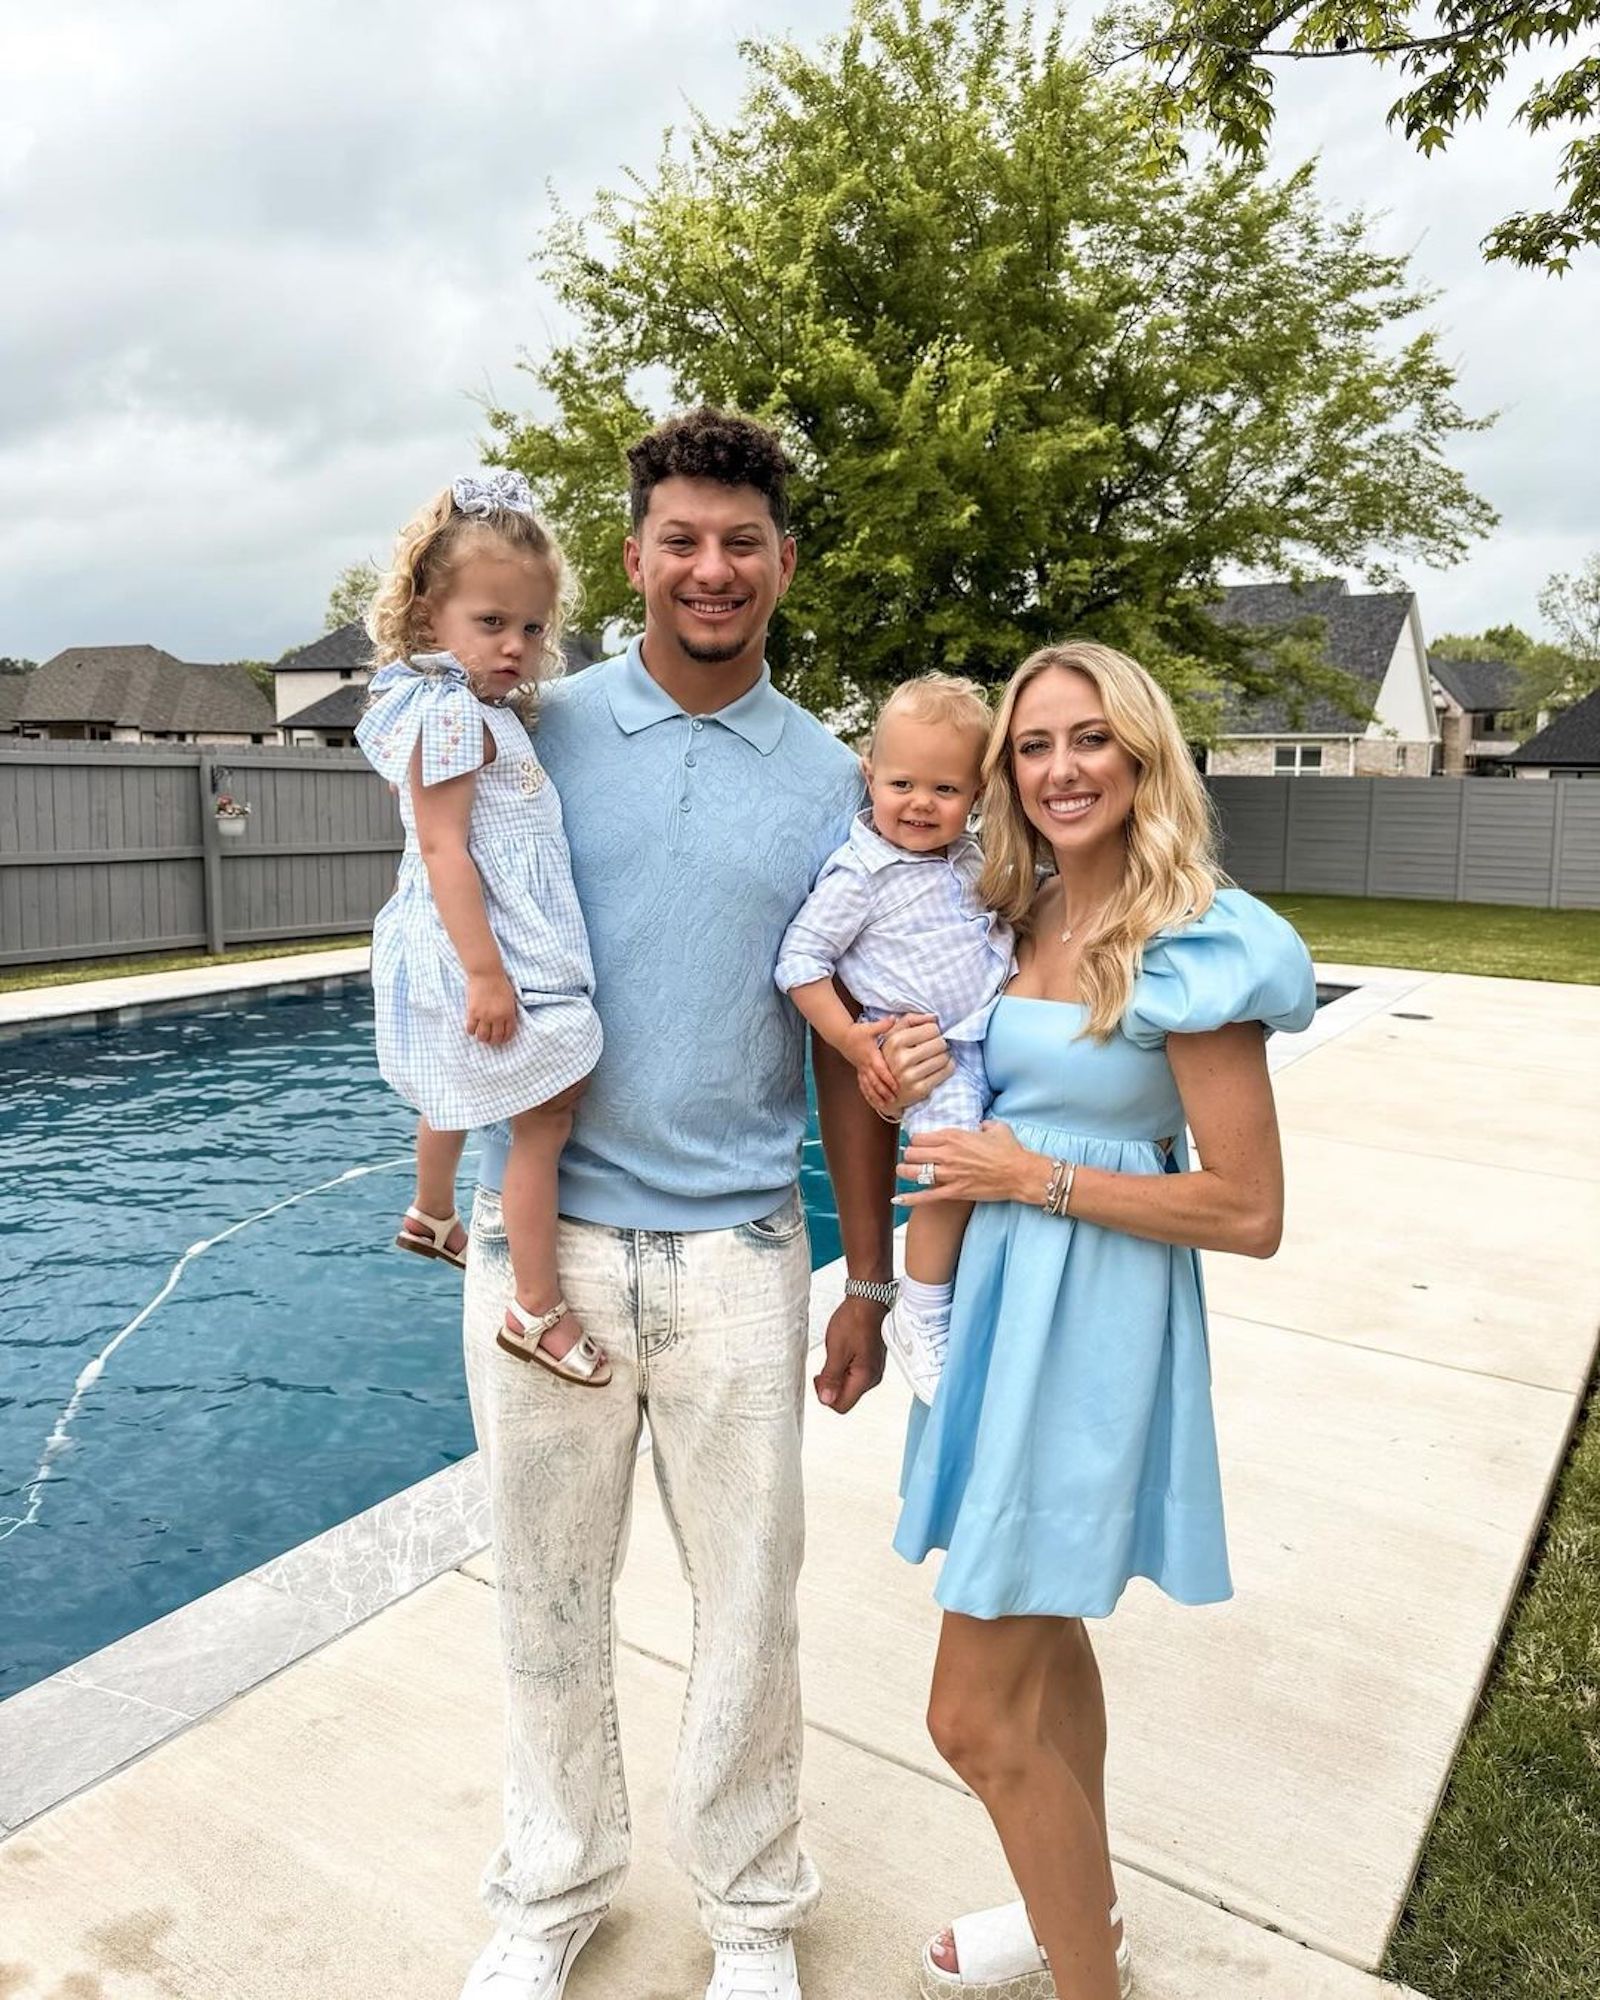 Patrick, Brittany Mahomes Wear Coordinating Blue Easter Outfits With 2 Kids